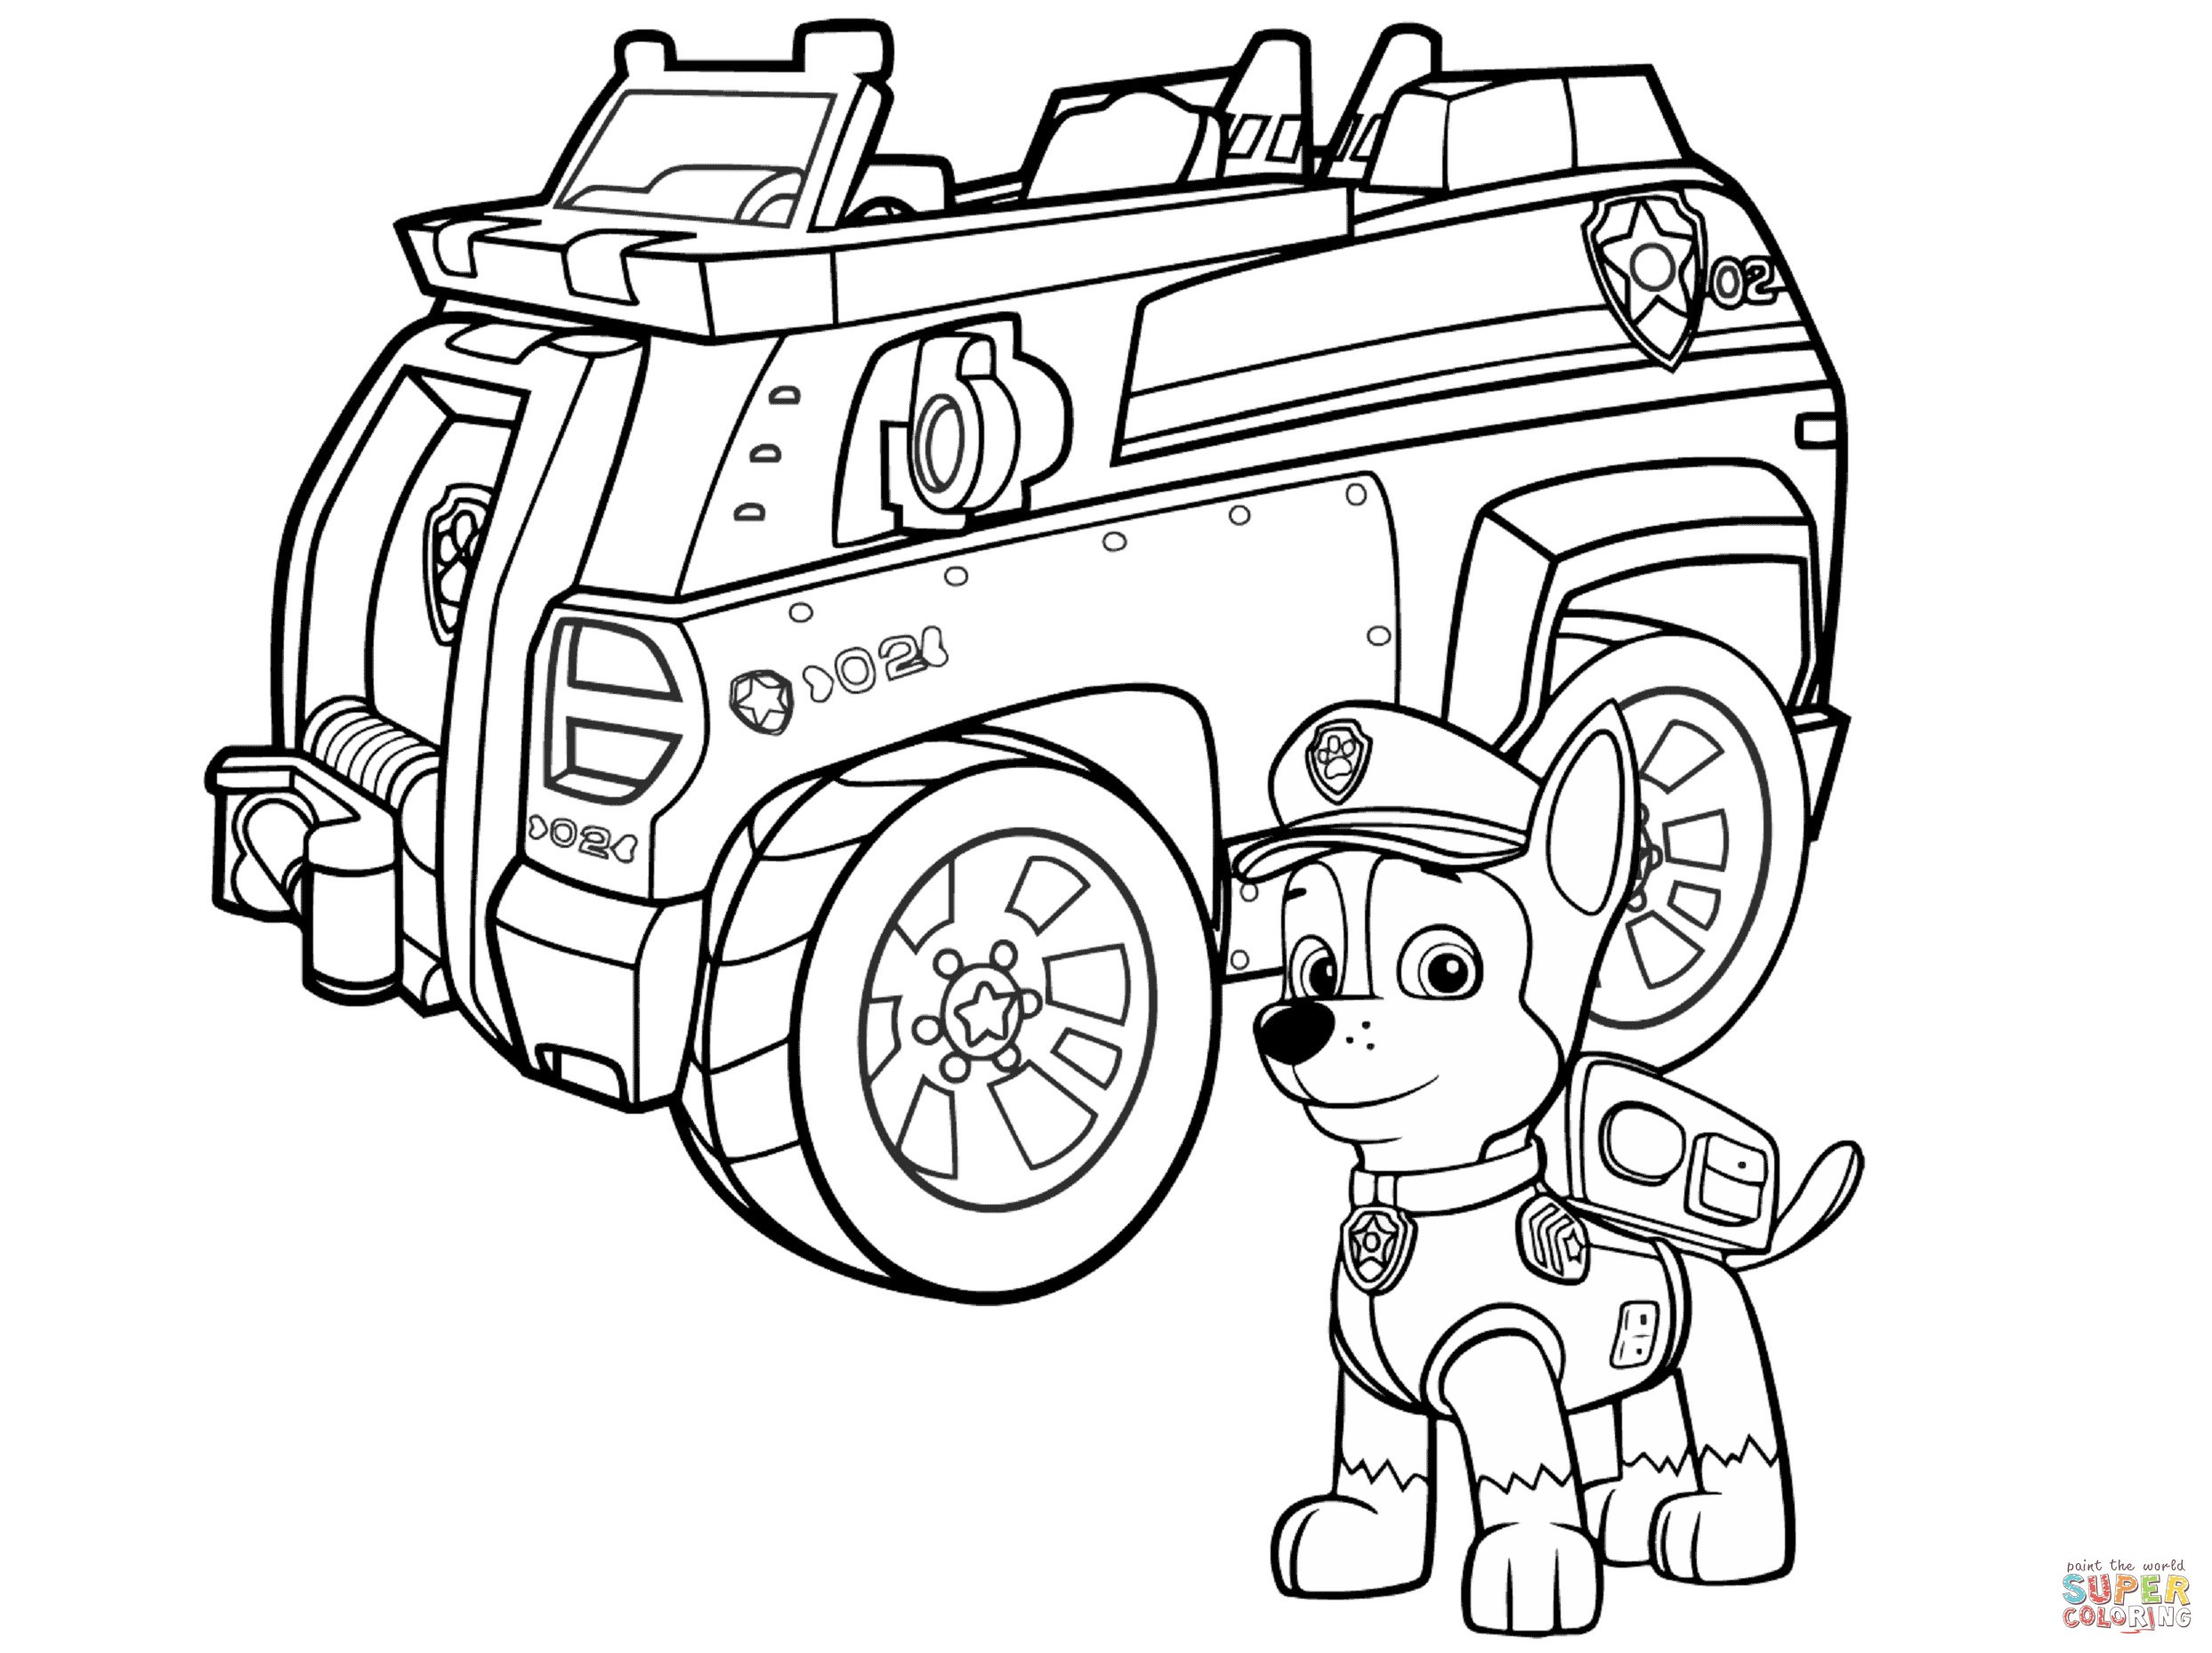 coloring pages : Police Car Printable Coloring Sheets Beautiful ...